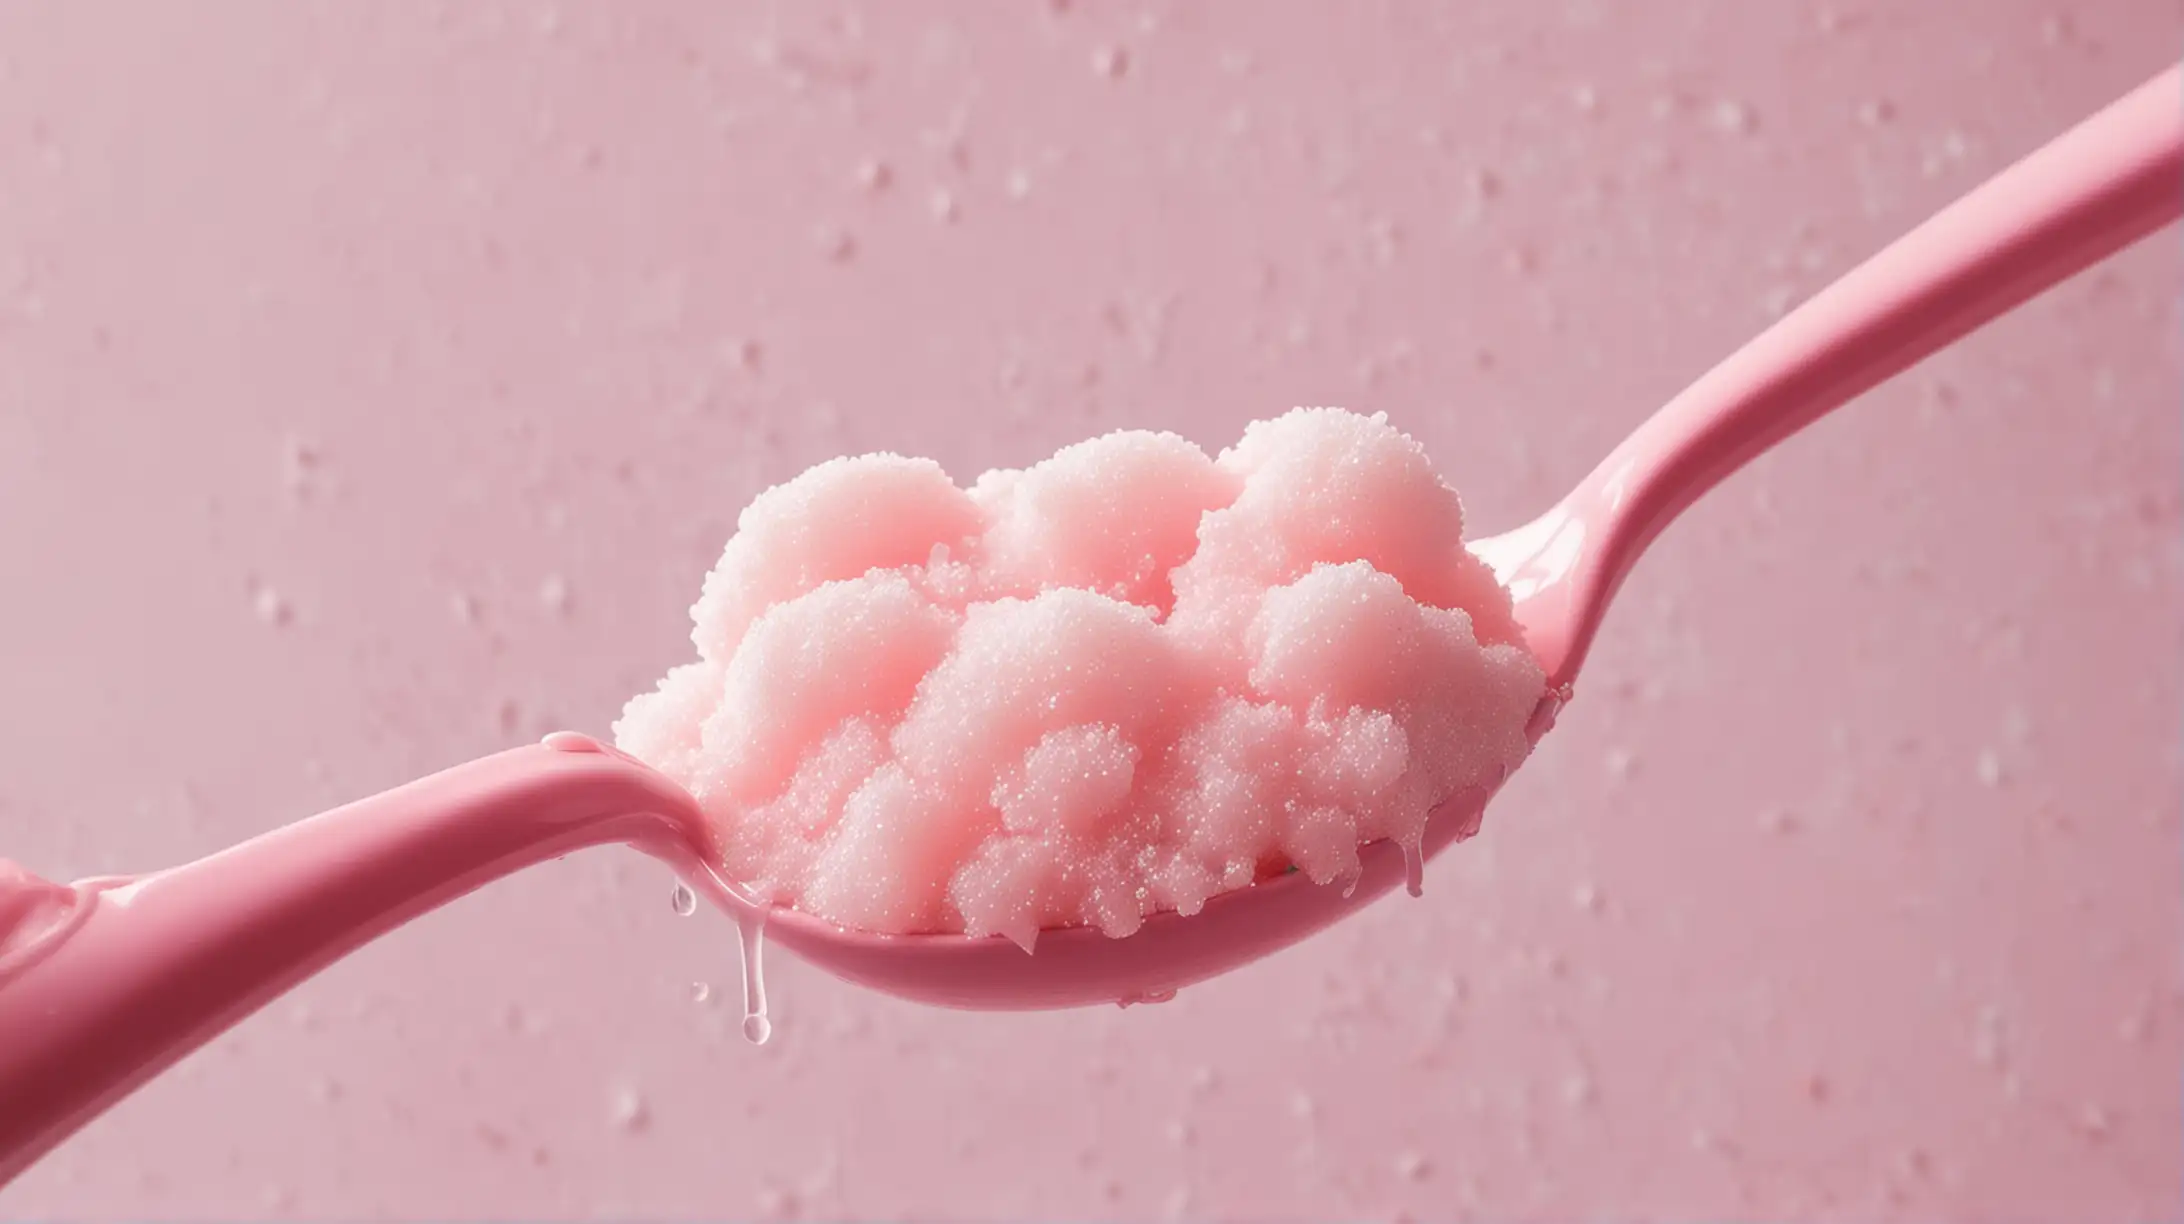 large pink spoon being held up. dripping sugar